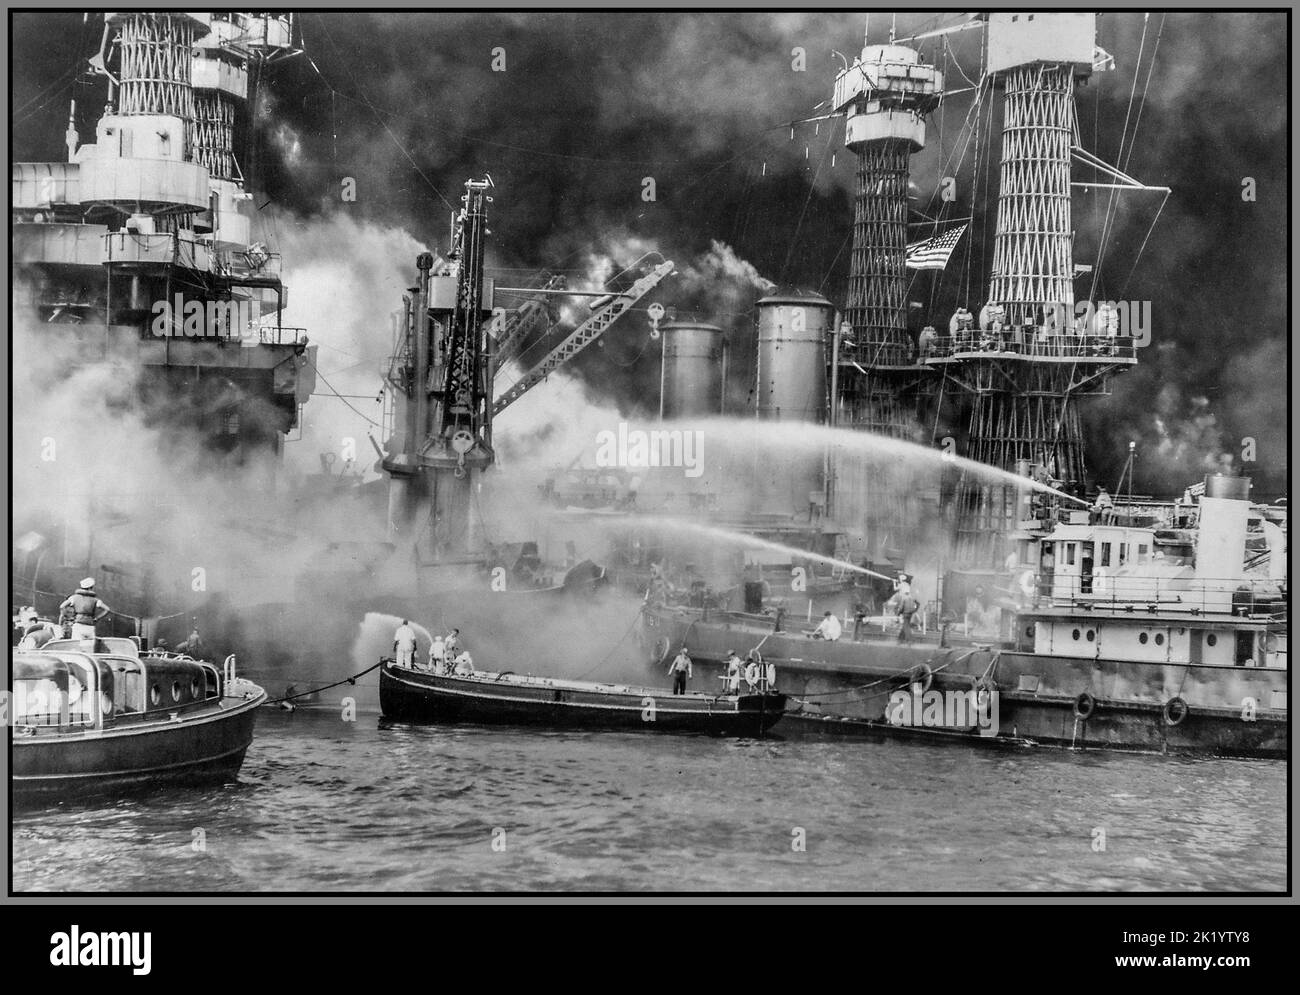 Pearl Harbor Japanese attack, Pearl Harbor taken by surprise, during the Japanese aerial attack. USS WEST VIRGINIA aflame with frantic and dramatic efforts to extinguish the flames. WW2 Japan America  7th December 1941 The start of war in the Pacific Stock Photo